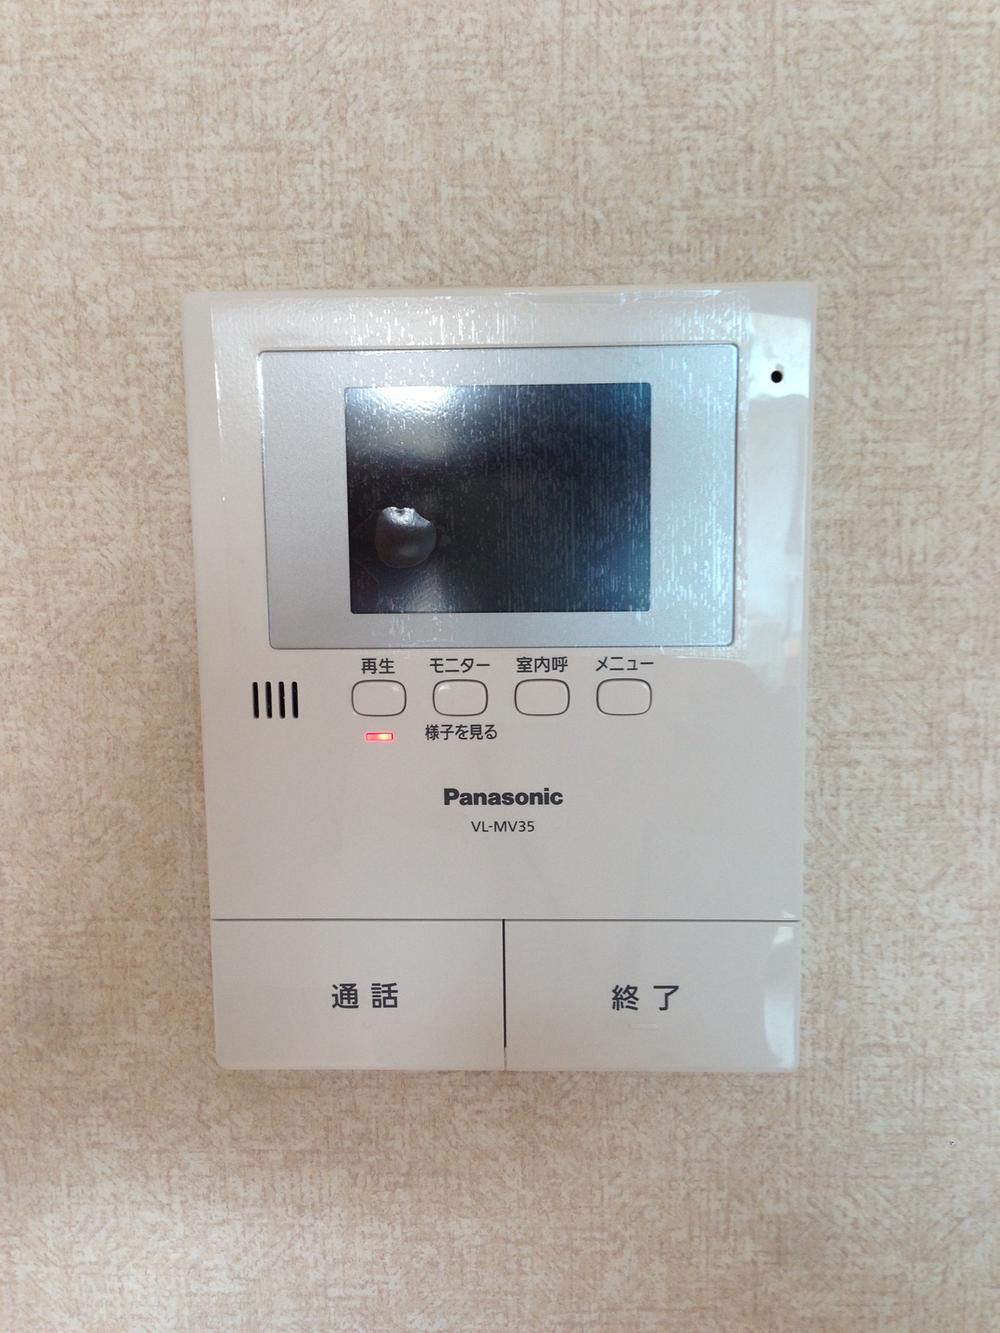 Security equipment. It is safe because the color monitor with intercom (same specifications) at the time of absence visit is also recorded in the color monitor.